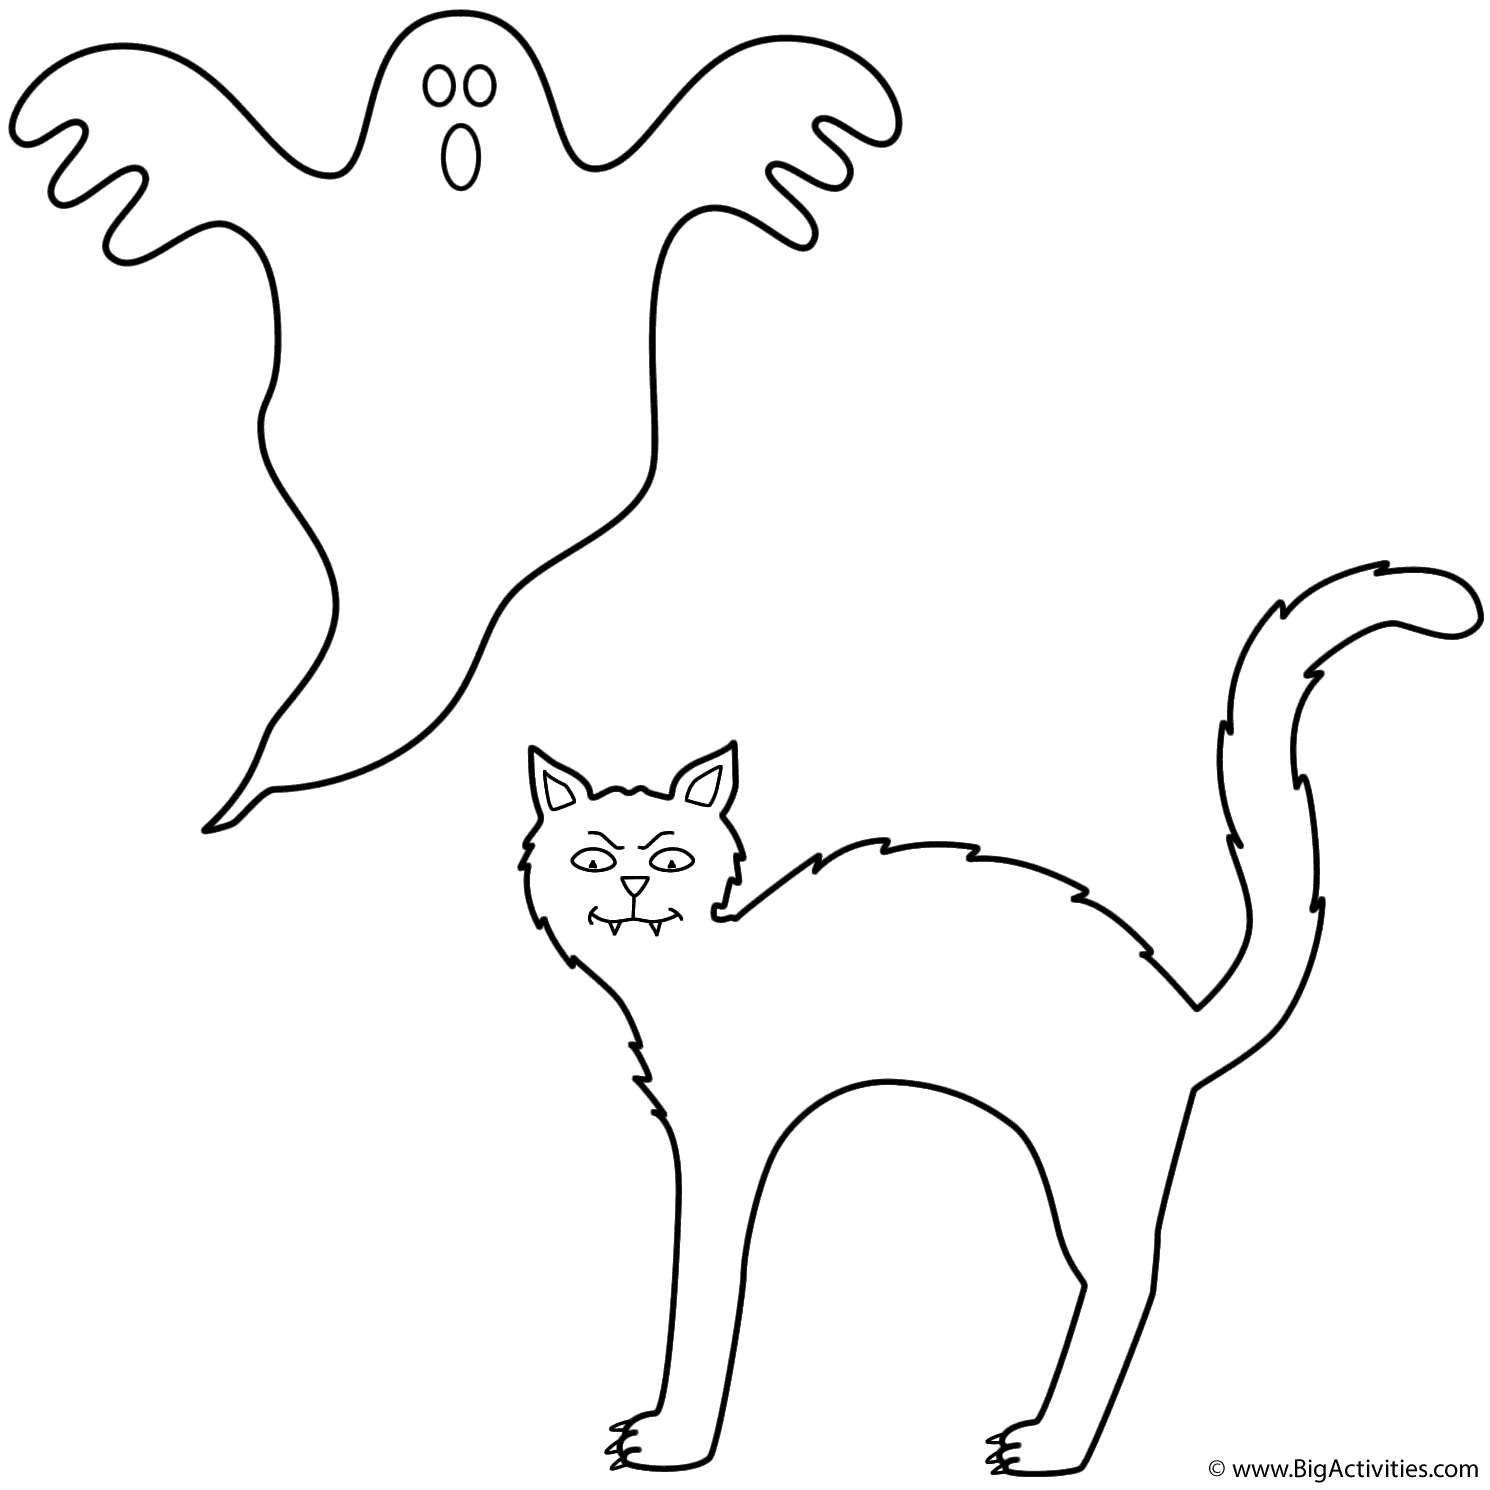 Black cat with ghost - Coloring Page (Halloween)